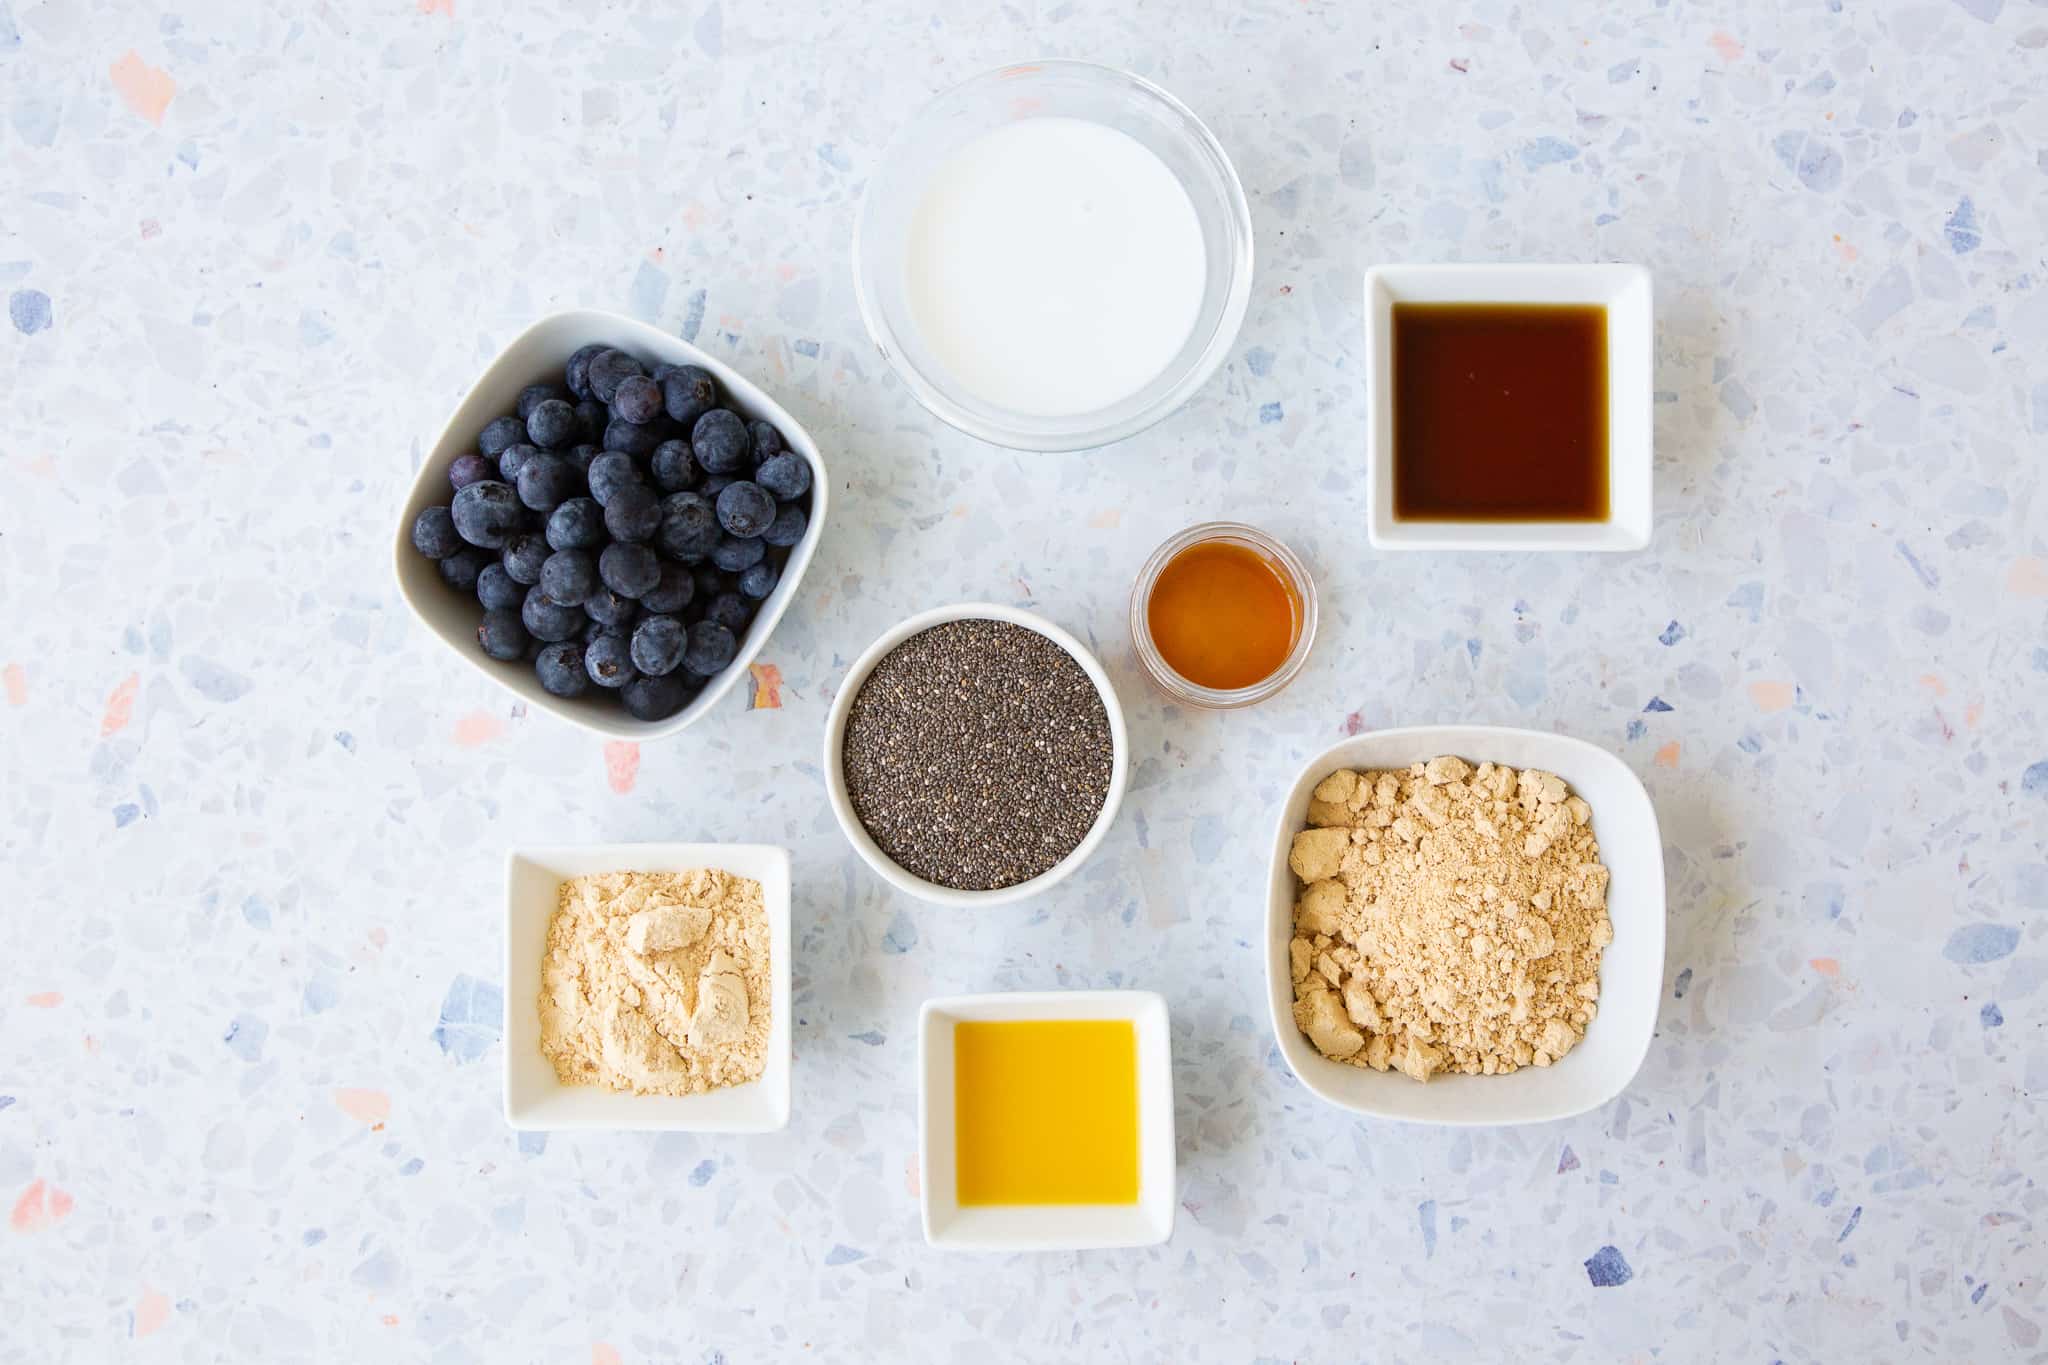 Ingredients for peanut butter and jelly chia pudding: blueberries, coconut milk, chia seeds, maple syrup, vanilla extract, peanut butter powder, orange juice and pea protein powder